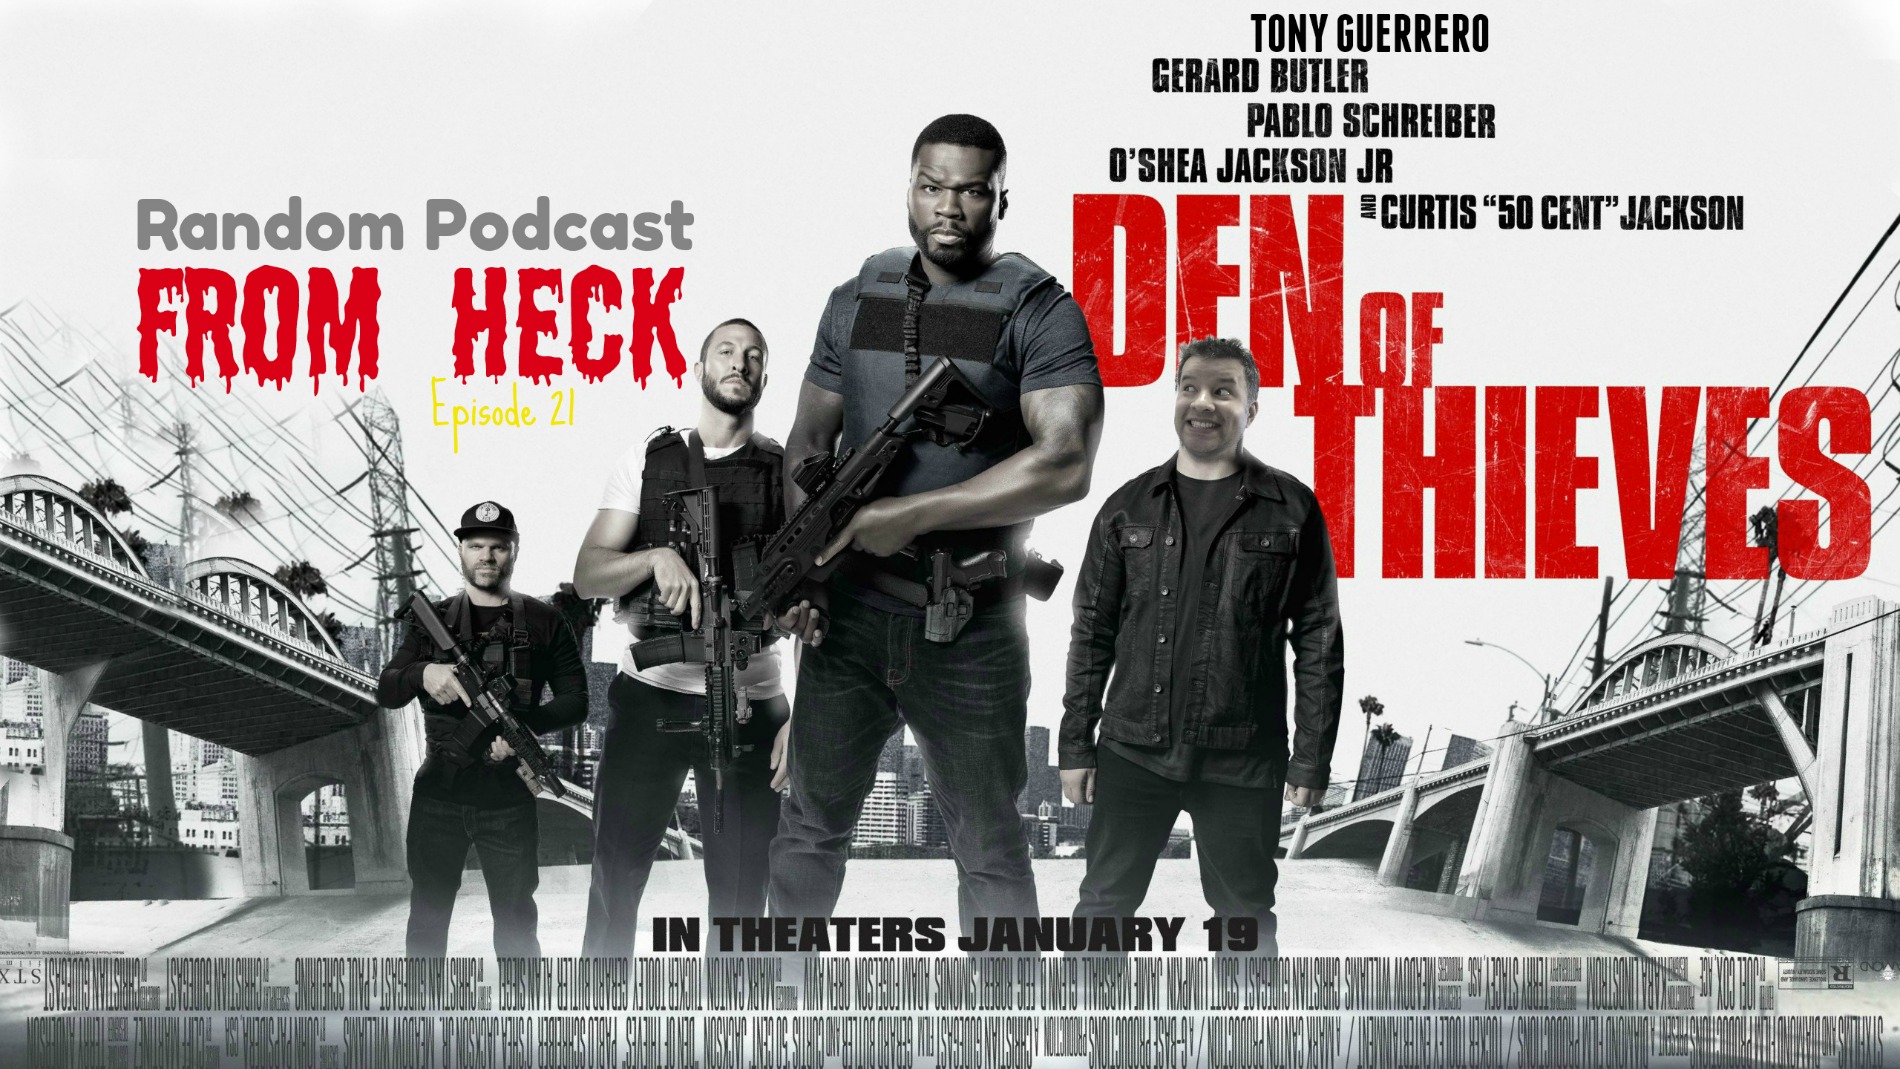 Episode 21: Den Of Thieves, The Maze Runner, Superman's Undies, Comics, And More